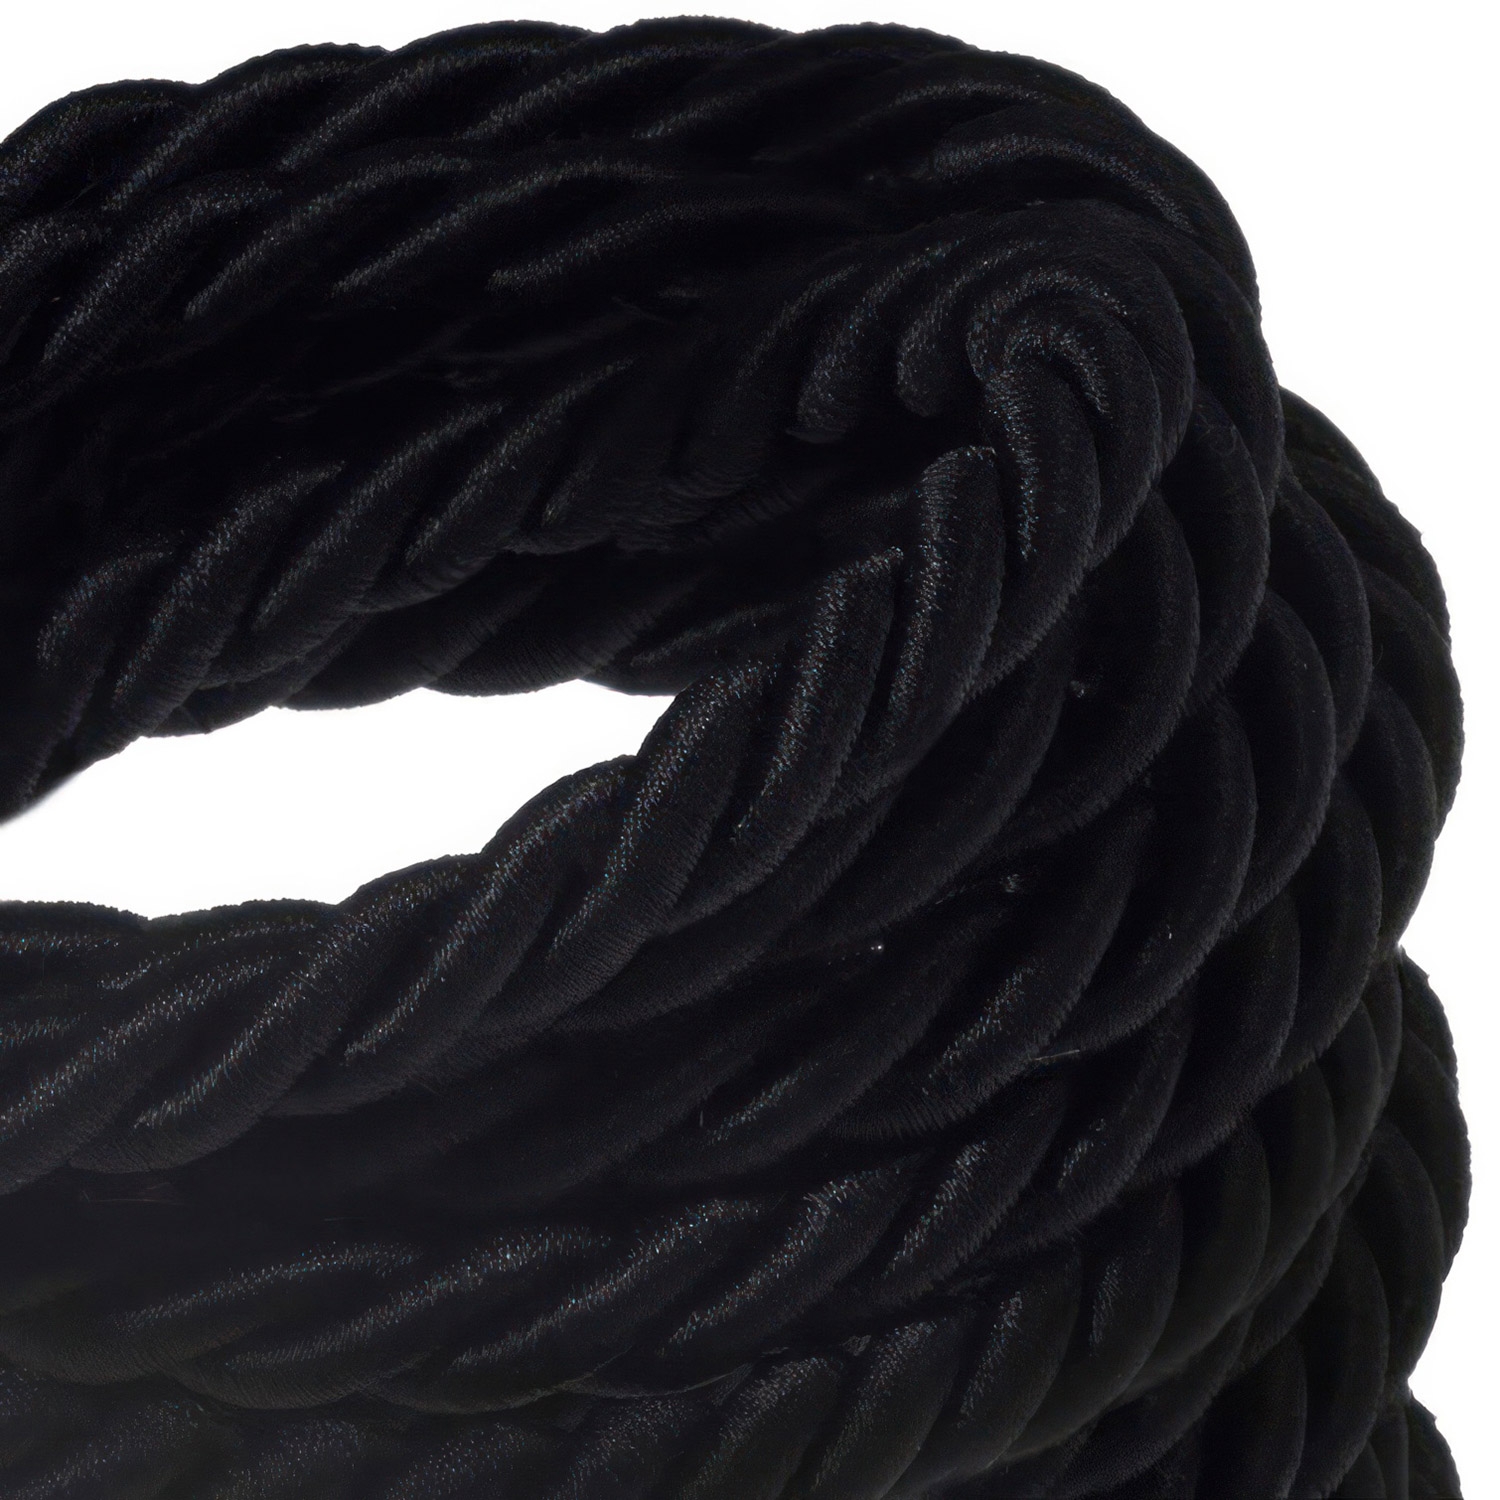 XL Rope electrical wire 18/3 AWG wire inside. Shiny Black Fabric. 16mm.